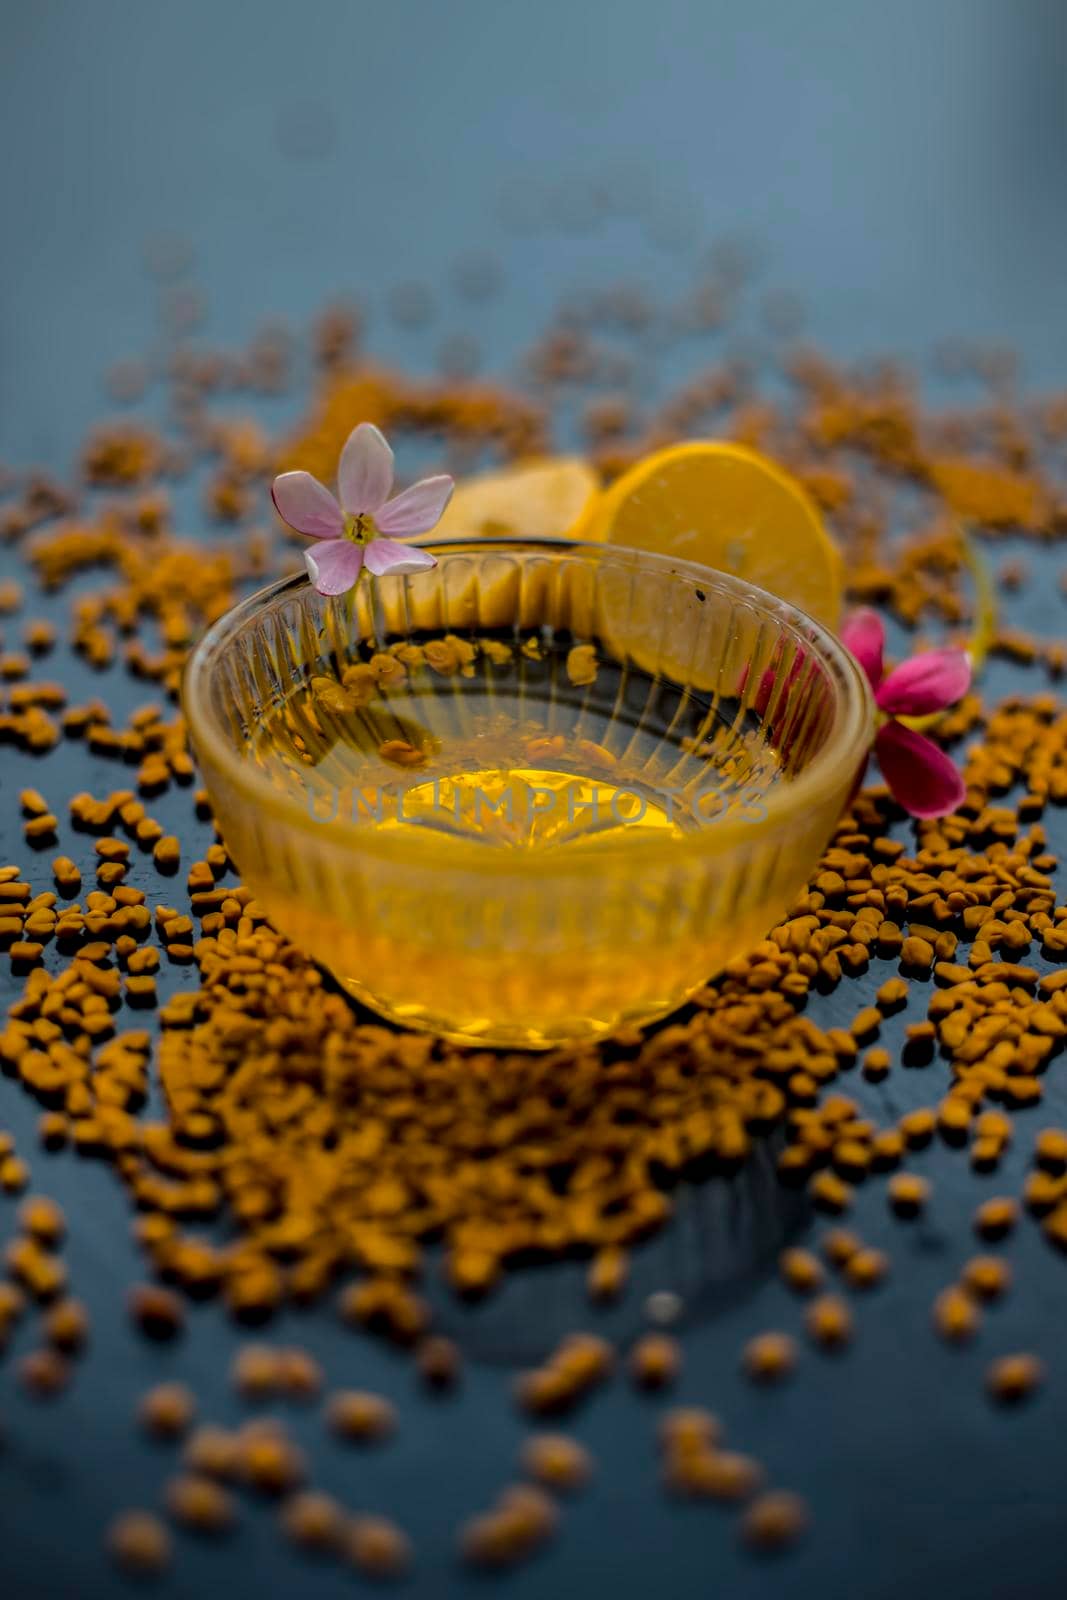 Famous natural method for dandruff on wooden surface in a glass bowl consisting of fenugreek seeds powder well mixed with lemon juice.With raw lemons and fenugreek seeds on the present on the surface. by mirzamlk